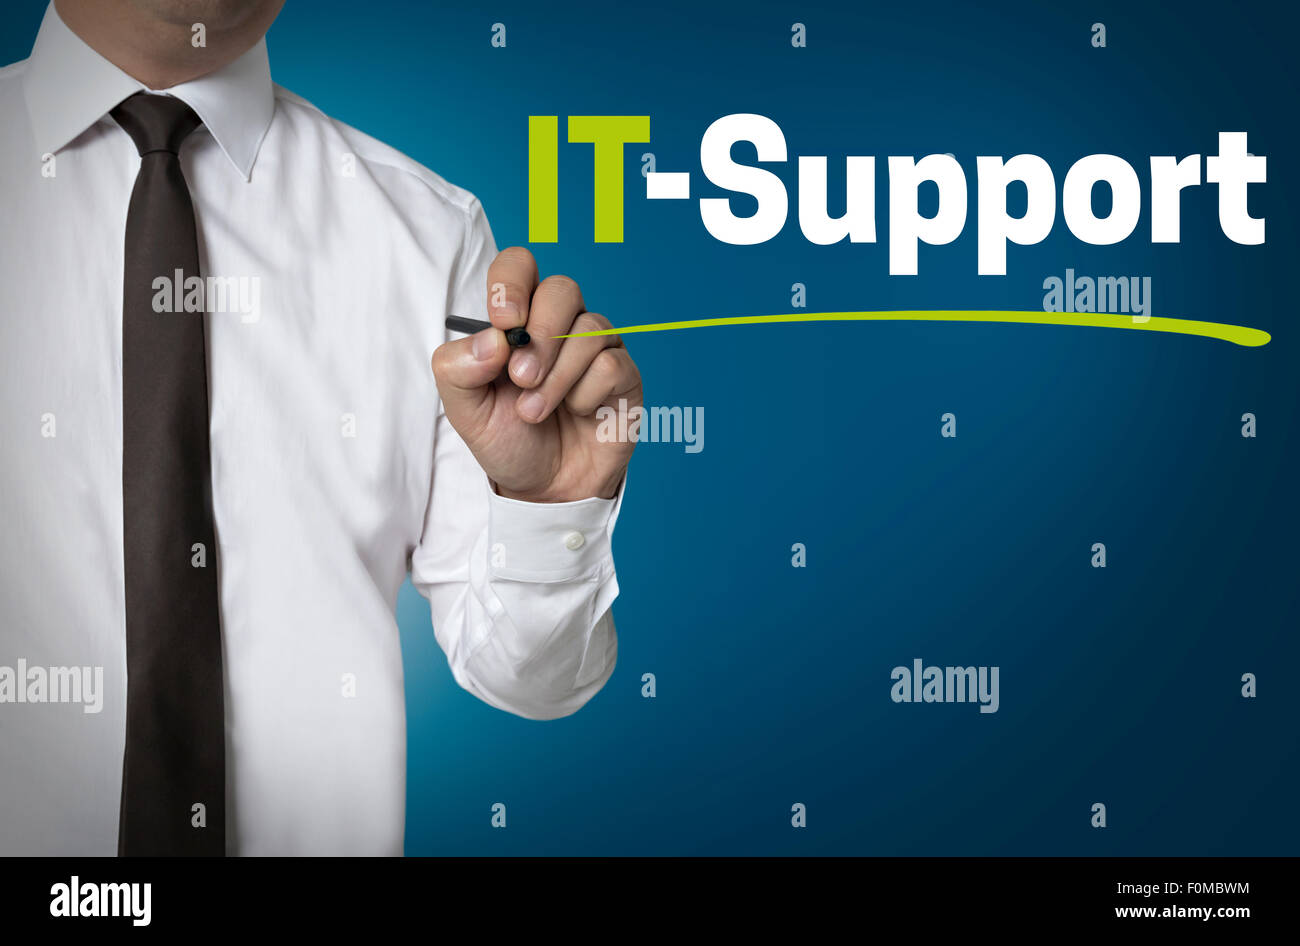 IT Support is written by businessman background. Stock Photo